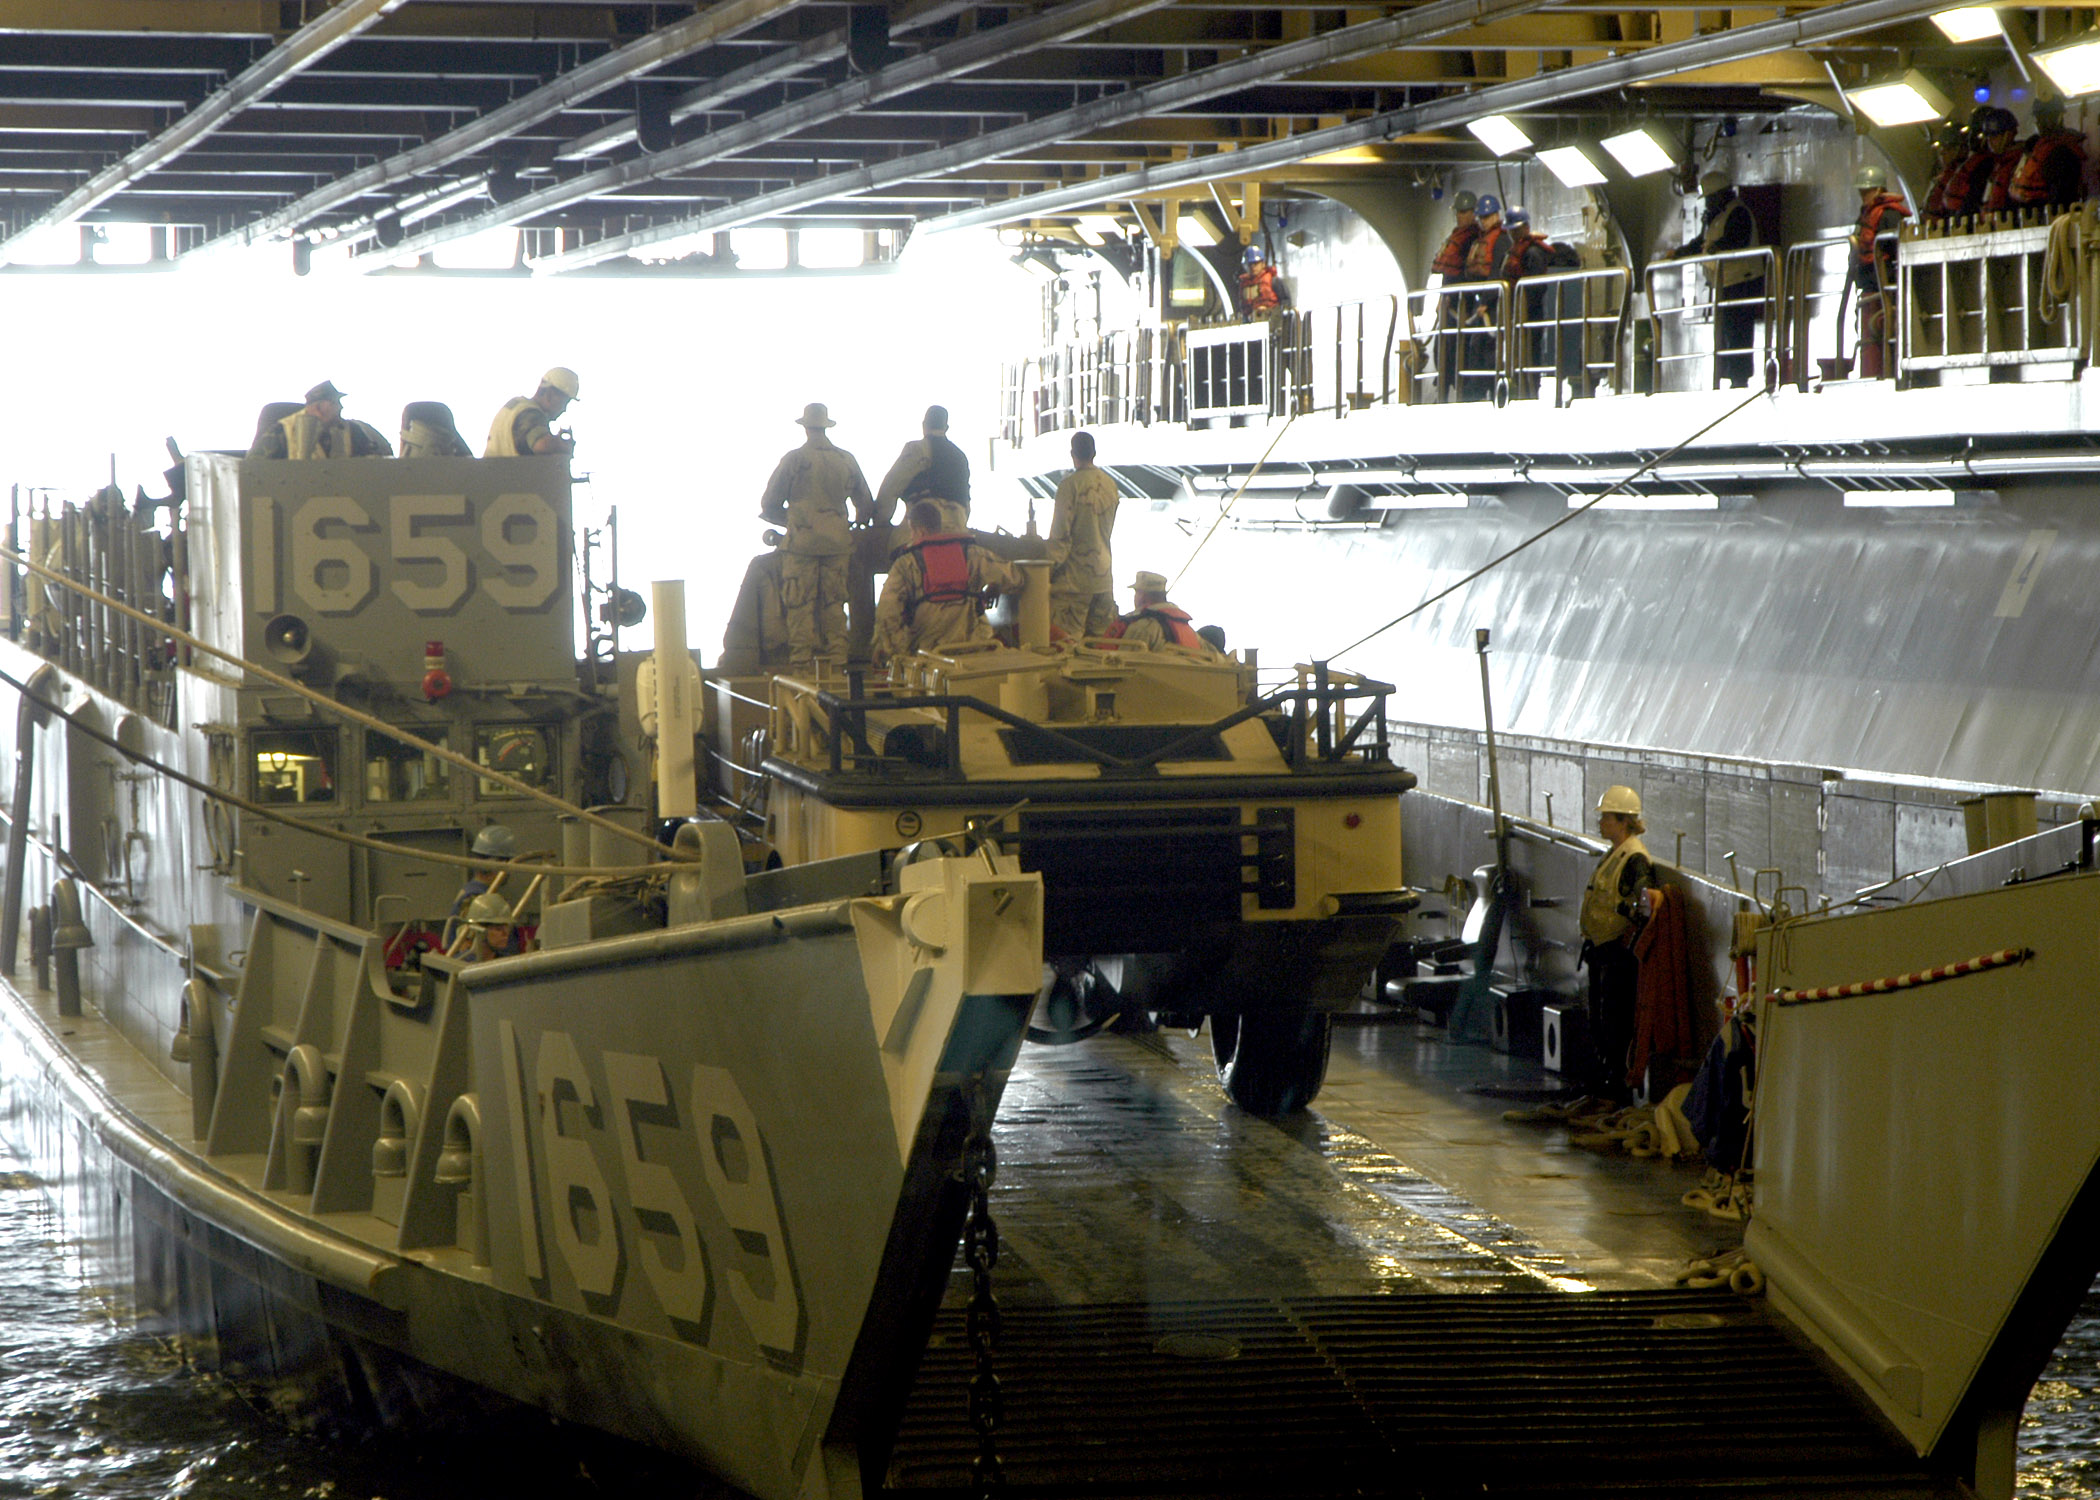 US_Navy_070515-N-8087D-018_Sailors_assigned_to_the_amphibious_assault_ship_USS_Wasp_(LHD_1)_load_a_service_vehicle_aboard_Landing_Craft_Unit_(LCU)._LCUs_are_primarily_used_to_transport_personnel_and_vehicles.jpg